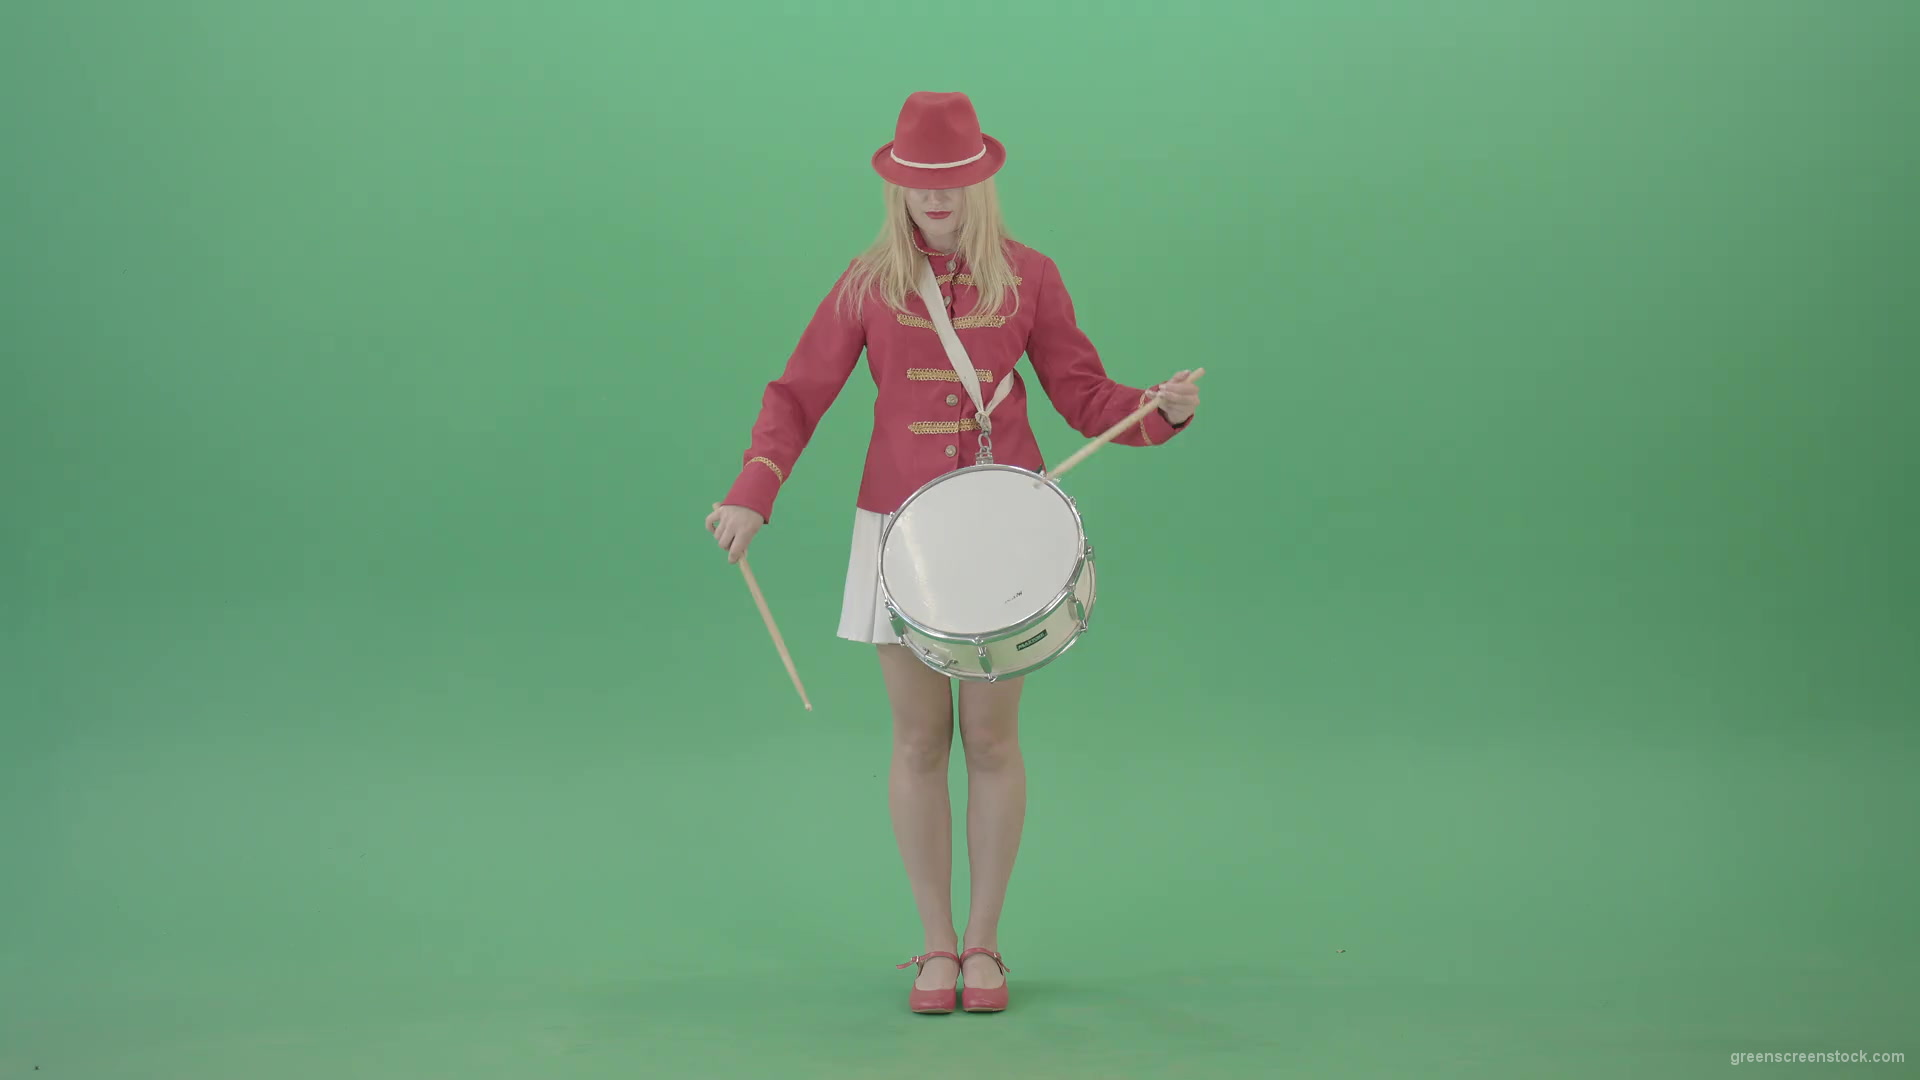 Blonde-woman-in-military-celebration-uniform-play-snare-drum-isolated-on-green-screen-4K-Video-footage-1920_001 Green Screen Stock